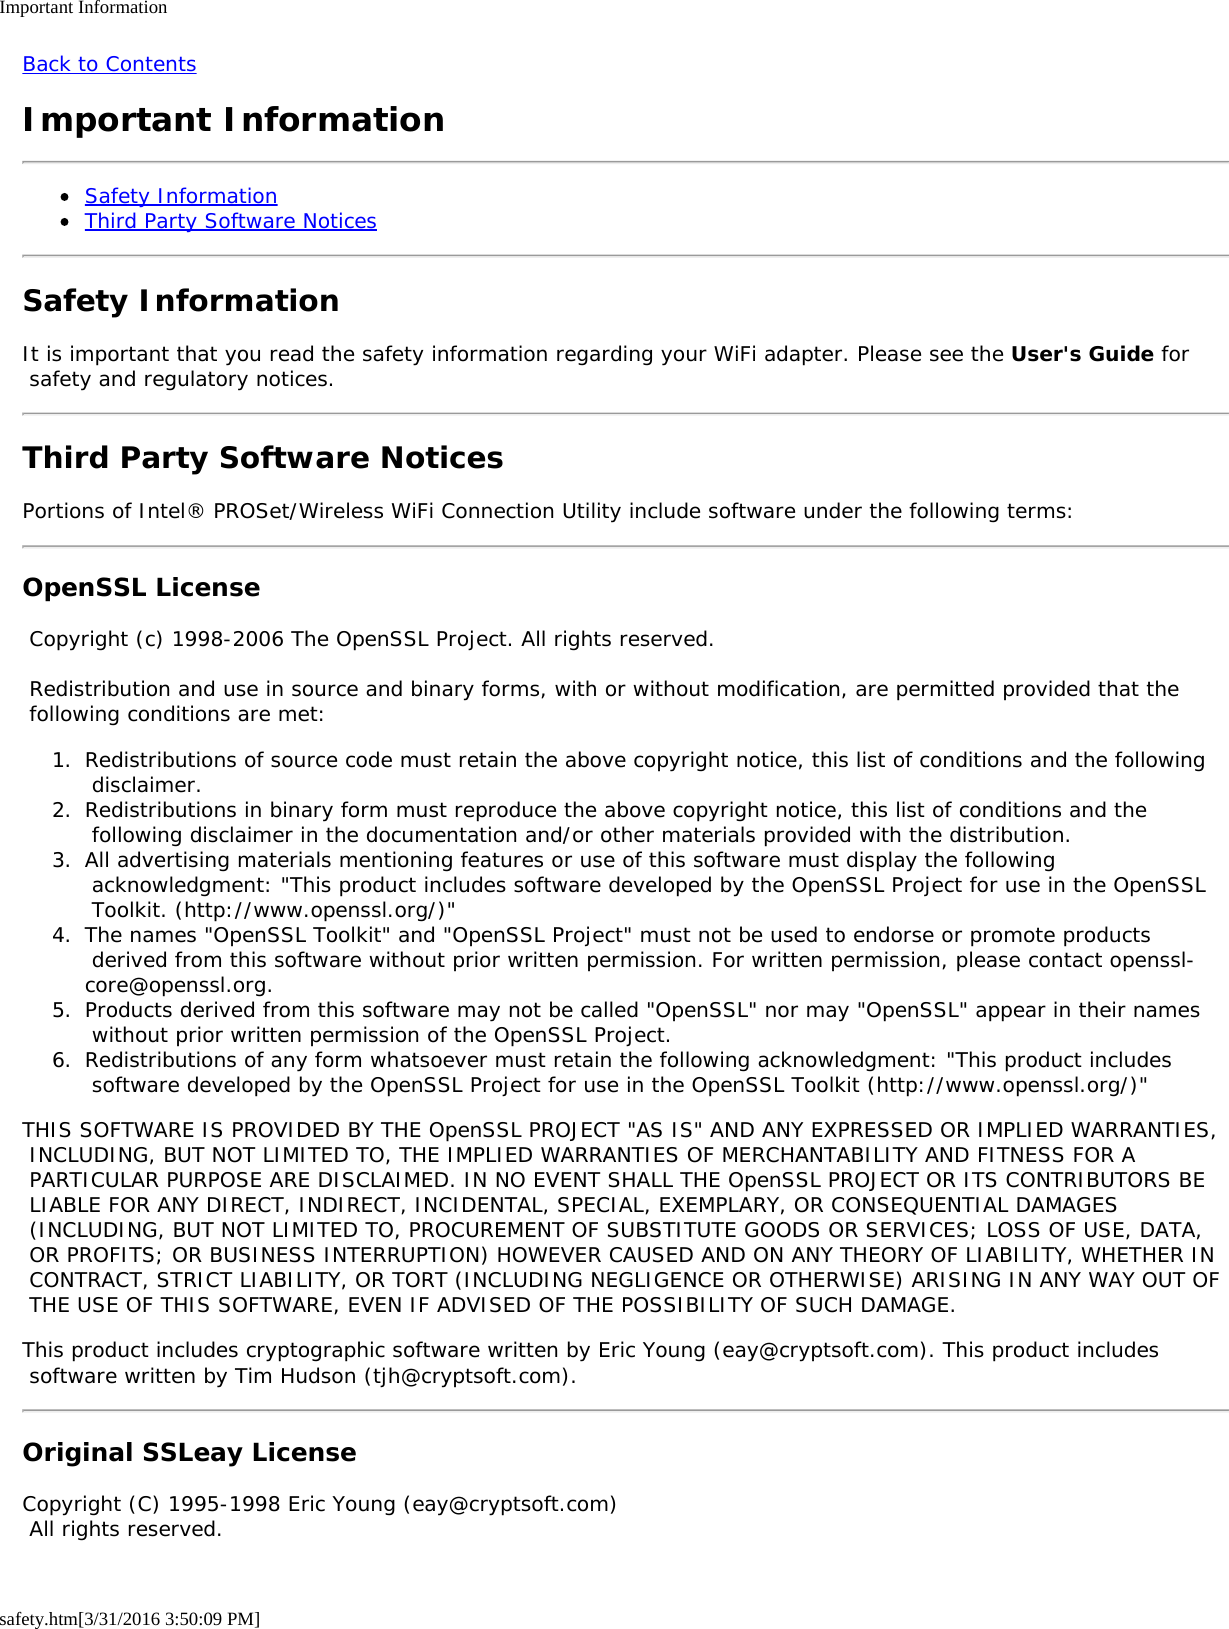 Important Informationsafety.htm[3/31/2016 3:50:09 PM]Back to ContentsImportant InformationSafety InformationThird Party Software NoticesSafety InformationIt is important that you read the safety information regarding your WiFi adapter. Please see the User&apos;s Guide for safety and regulatory notices.Third Party Software NoticesPortions of Intel® PROSet/Wireless WiFi Connection Utility include software under the following terms:OpenSSL License Copyright (c) 1998-2006 The OpenSSL Project. All rights reserved. Redistribution and use in source and binary forms, with or without modification, are permitted provided that the following conditions are met:1.  Redistributions of source code must retain the above copyright notice, this list of conditions and the following disclaimer.2.  Redistributions in binary form must reproduce the above copyright notice, this list of conditions and the following disclaimer in the documentation and/or other materials provided with the distribution.3.  All advertising materials mentioning features or use of this software must display the following acknowledgment: &quot;This product includes software developed by the OpenSSL Project for use in the OpenSSL Toolkit. (http://www.openssl.org/)&quot;4.  The names &quot;OpenSSL Toolkit&quot; and &quot;OpenSSL Project&quot; must not be used to endorse or promote products derived from this software without prior written permission. For written permission, please contact openssl-core@openssl.org.5.  Products derived from this software may not be called &quot;OpenSSL&quot; nor may &quot;OpenSSL&quot; appear in their names without prior written permission of the OpenSSL Project.6.  Redistributions of any form whatsoever must retain the following acknowledgment: &quot;This product includes software developed by the OpenSSL Project for use in the OpenSSL Toolkit (http://www.openssl.org/)&quot;THIS SOFTWARE IS PROVIDED BY THE OpenSSL PROJECT &quot;AS IS&quot; AND ANY EXPRESSED OR IMPLIED WARRANTIES, INCLUDING, BUT NOT LIMITED TO, THE IMPLIED WARRANTIES OF MERCHANTABILITY AND FITNESS FOR A PARTICULAR PURPOSE ARE DISCLAIMED. IN NO EVENT SHALL THE OpenSSL PROJECT OR ITS CONTRIBUTORS BE LIABLE FOR ANY DIRECT, INDIRECT, INCIDENTAL, SPECIAL, EXEMPLARY, OR CONSEQUENTIAL DAMAGES (INCLUDING, BUT NOT LIMITED TO, PROCUREMENT OF SUBSTITUTE GOODS OR SERVICES; LOSS OF USE, DATA, OR PROFITS; OR BUSINESS INTERRUPTION) HOWEVER CAUSED AND ON ANY THEORY OF LIABILITY, WHETHER IN CONTRACT, STRICT LIABILITY, OR TORT (INCLUDING NEGLIGENCE OR OTHERWISE) ARISING IN ANY WAY OUT OF THE USE OF THIS SOFTWARE, EVEN IF ADVISED OF THE POSSIBILITY OF SUCH DAMAGE.This product includes cryptographic software written by Eric Young (eay@cryptsoft.com). This product includes software written by Tim Hudson (tjh@cryptsoft.com).Original SSLeay LicenseCopyright (C) 1995-1998 Eric Young (eay@cryptsoft.com) All rights reserved.